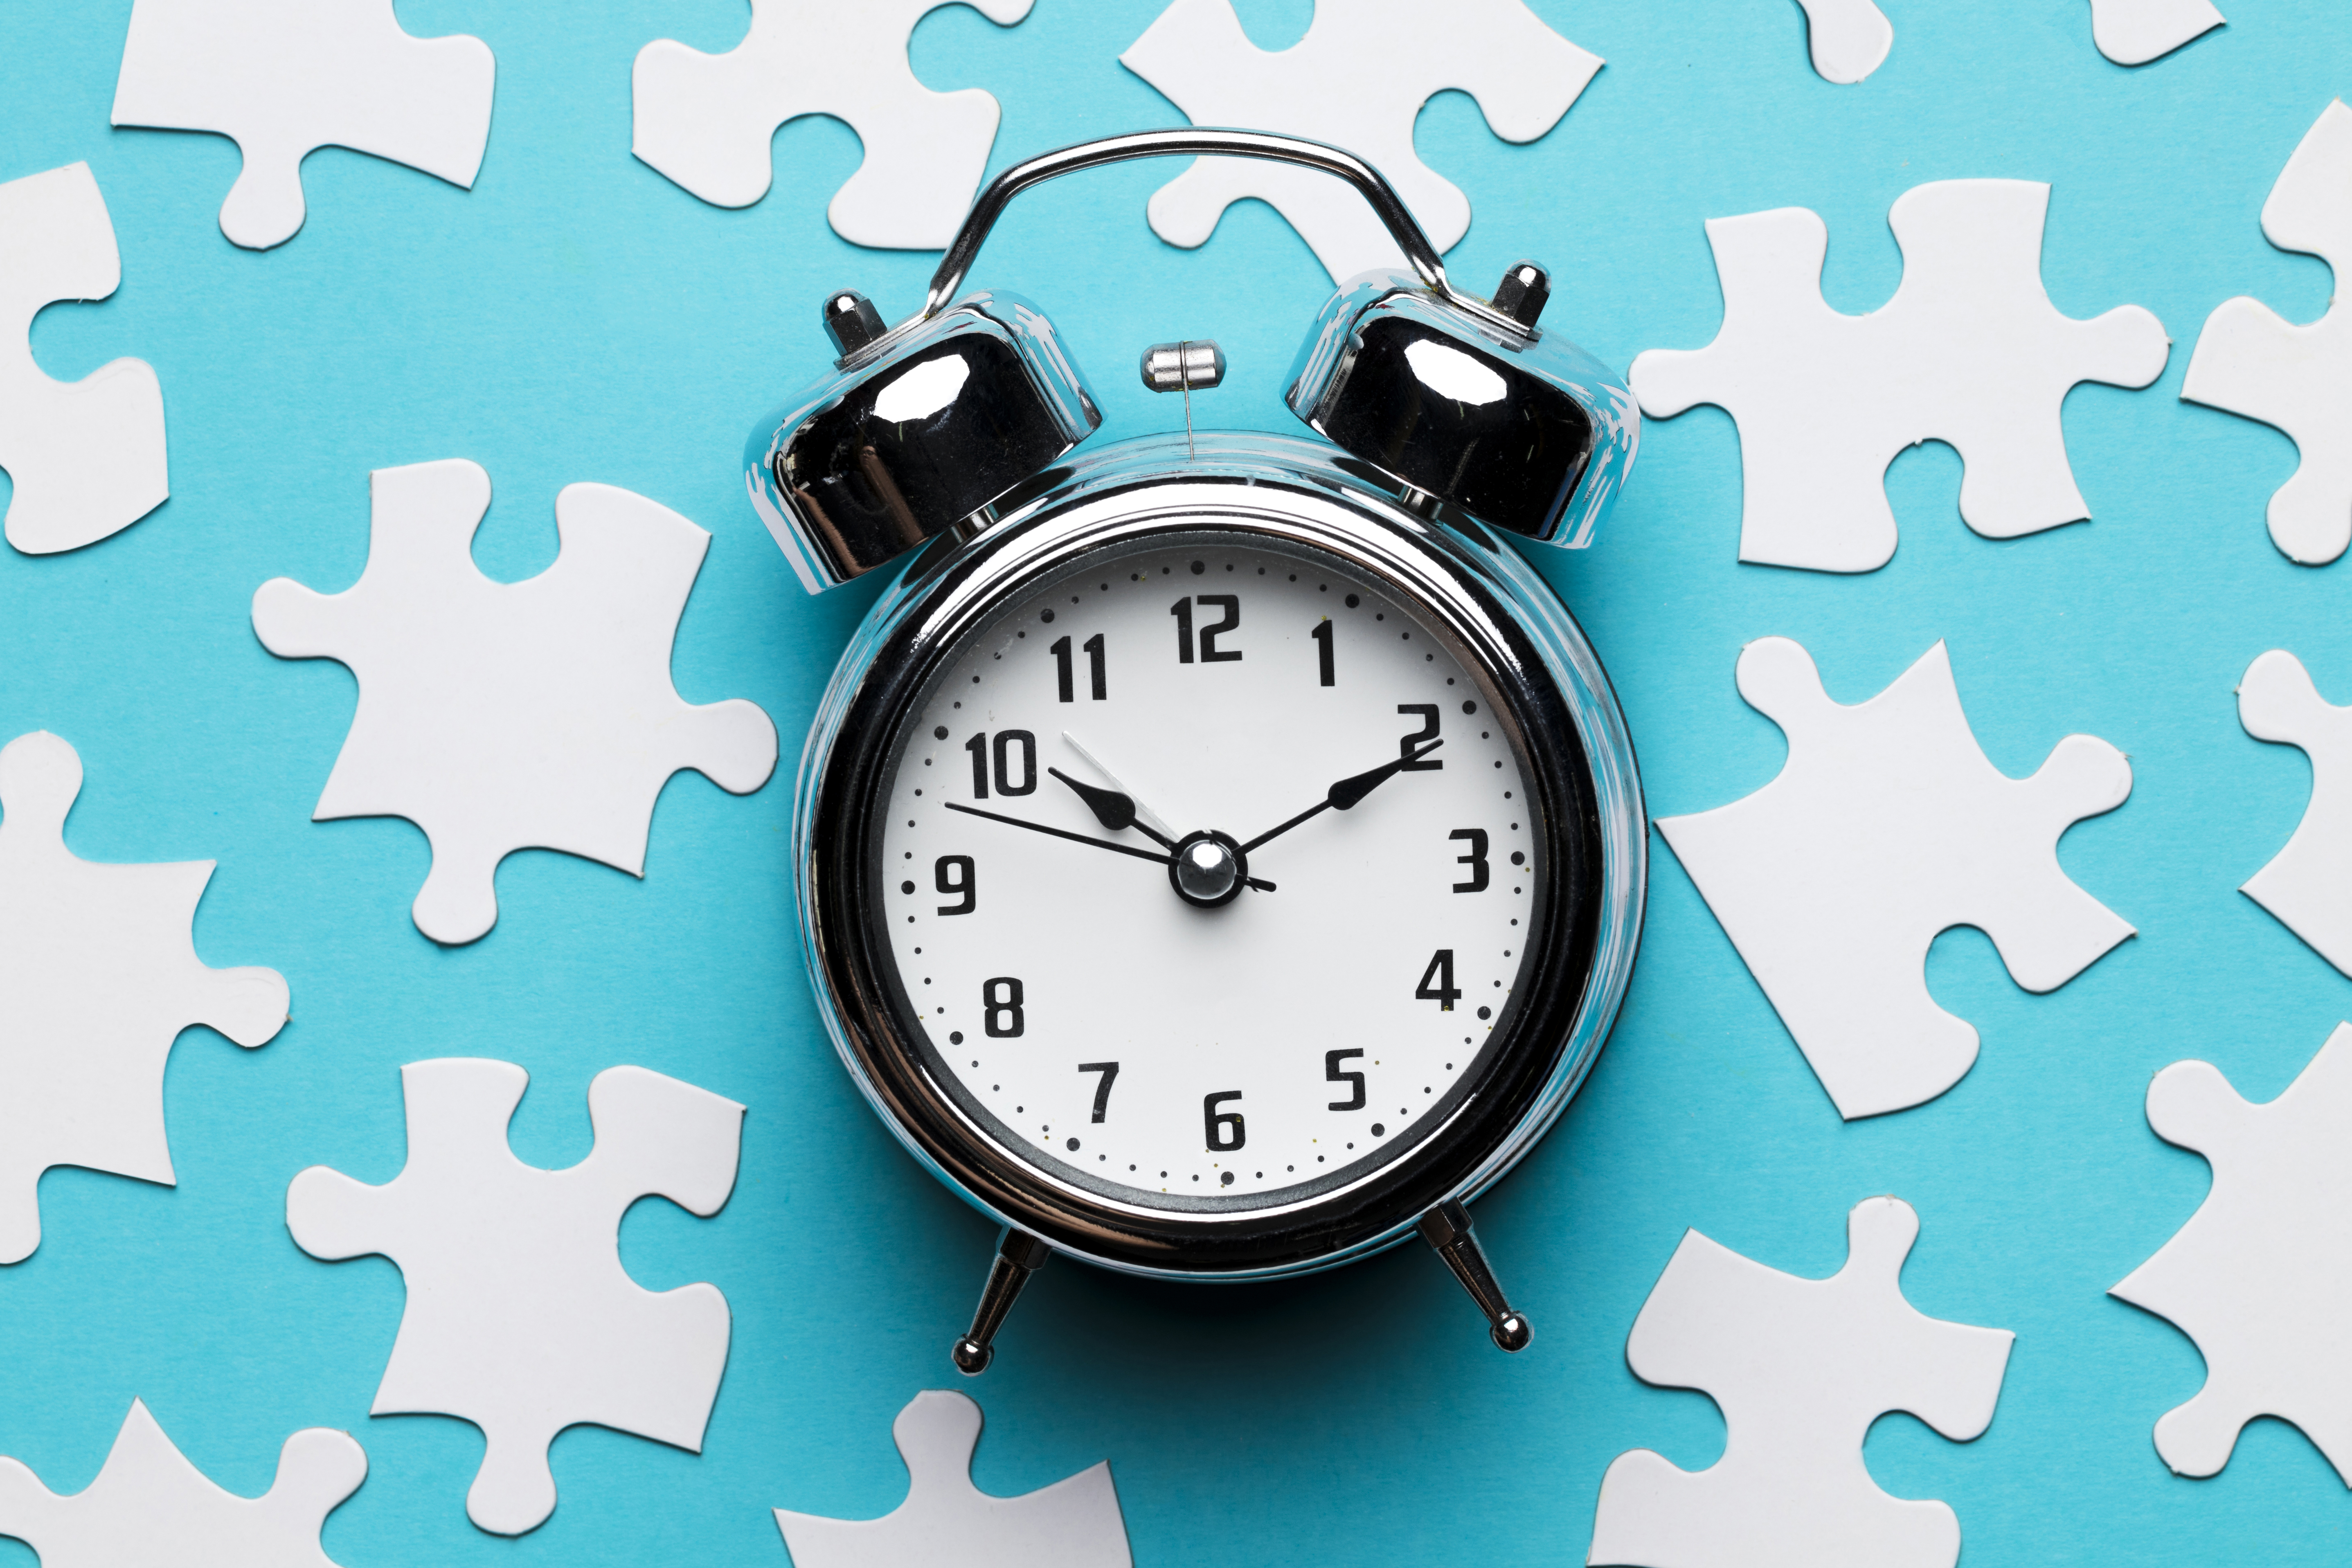 Alarm clock on blue background with scattered white puzzle pieces.